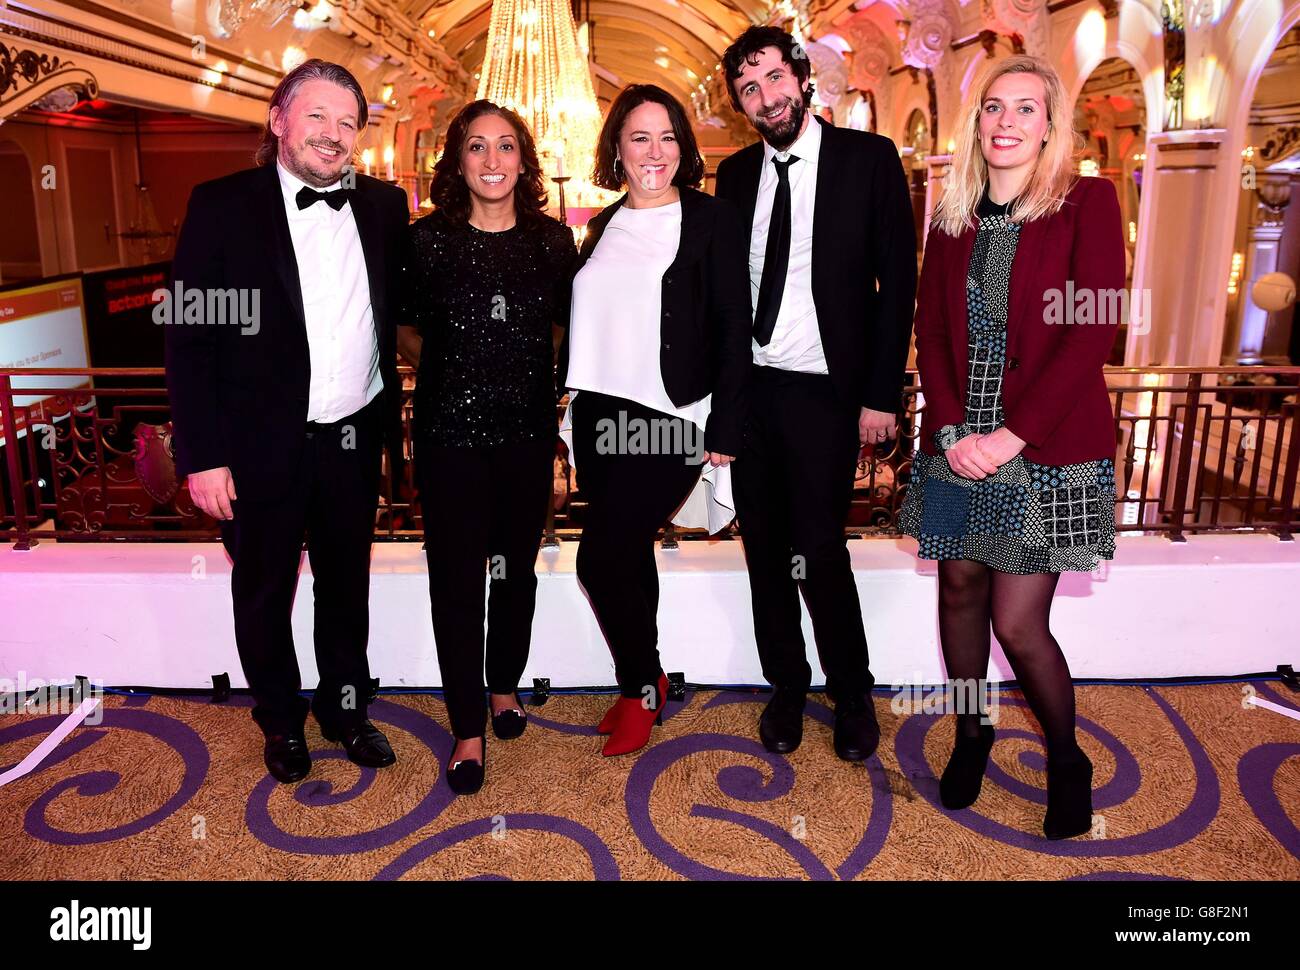 (Left to right) Richard Herring, Shazia Mirza, Arabella Weir, Mark Watson and Sara Pascoe attending the Winter Comedy Gala in aid of ActionAid at the Grand Connaught Rooms in London. Stock Photo